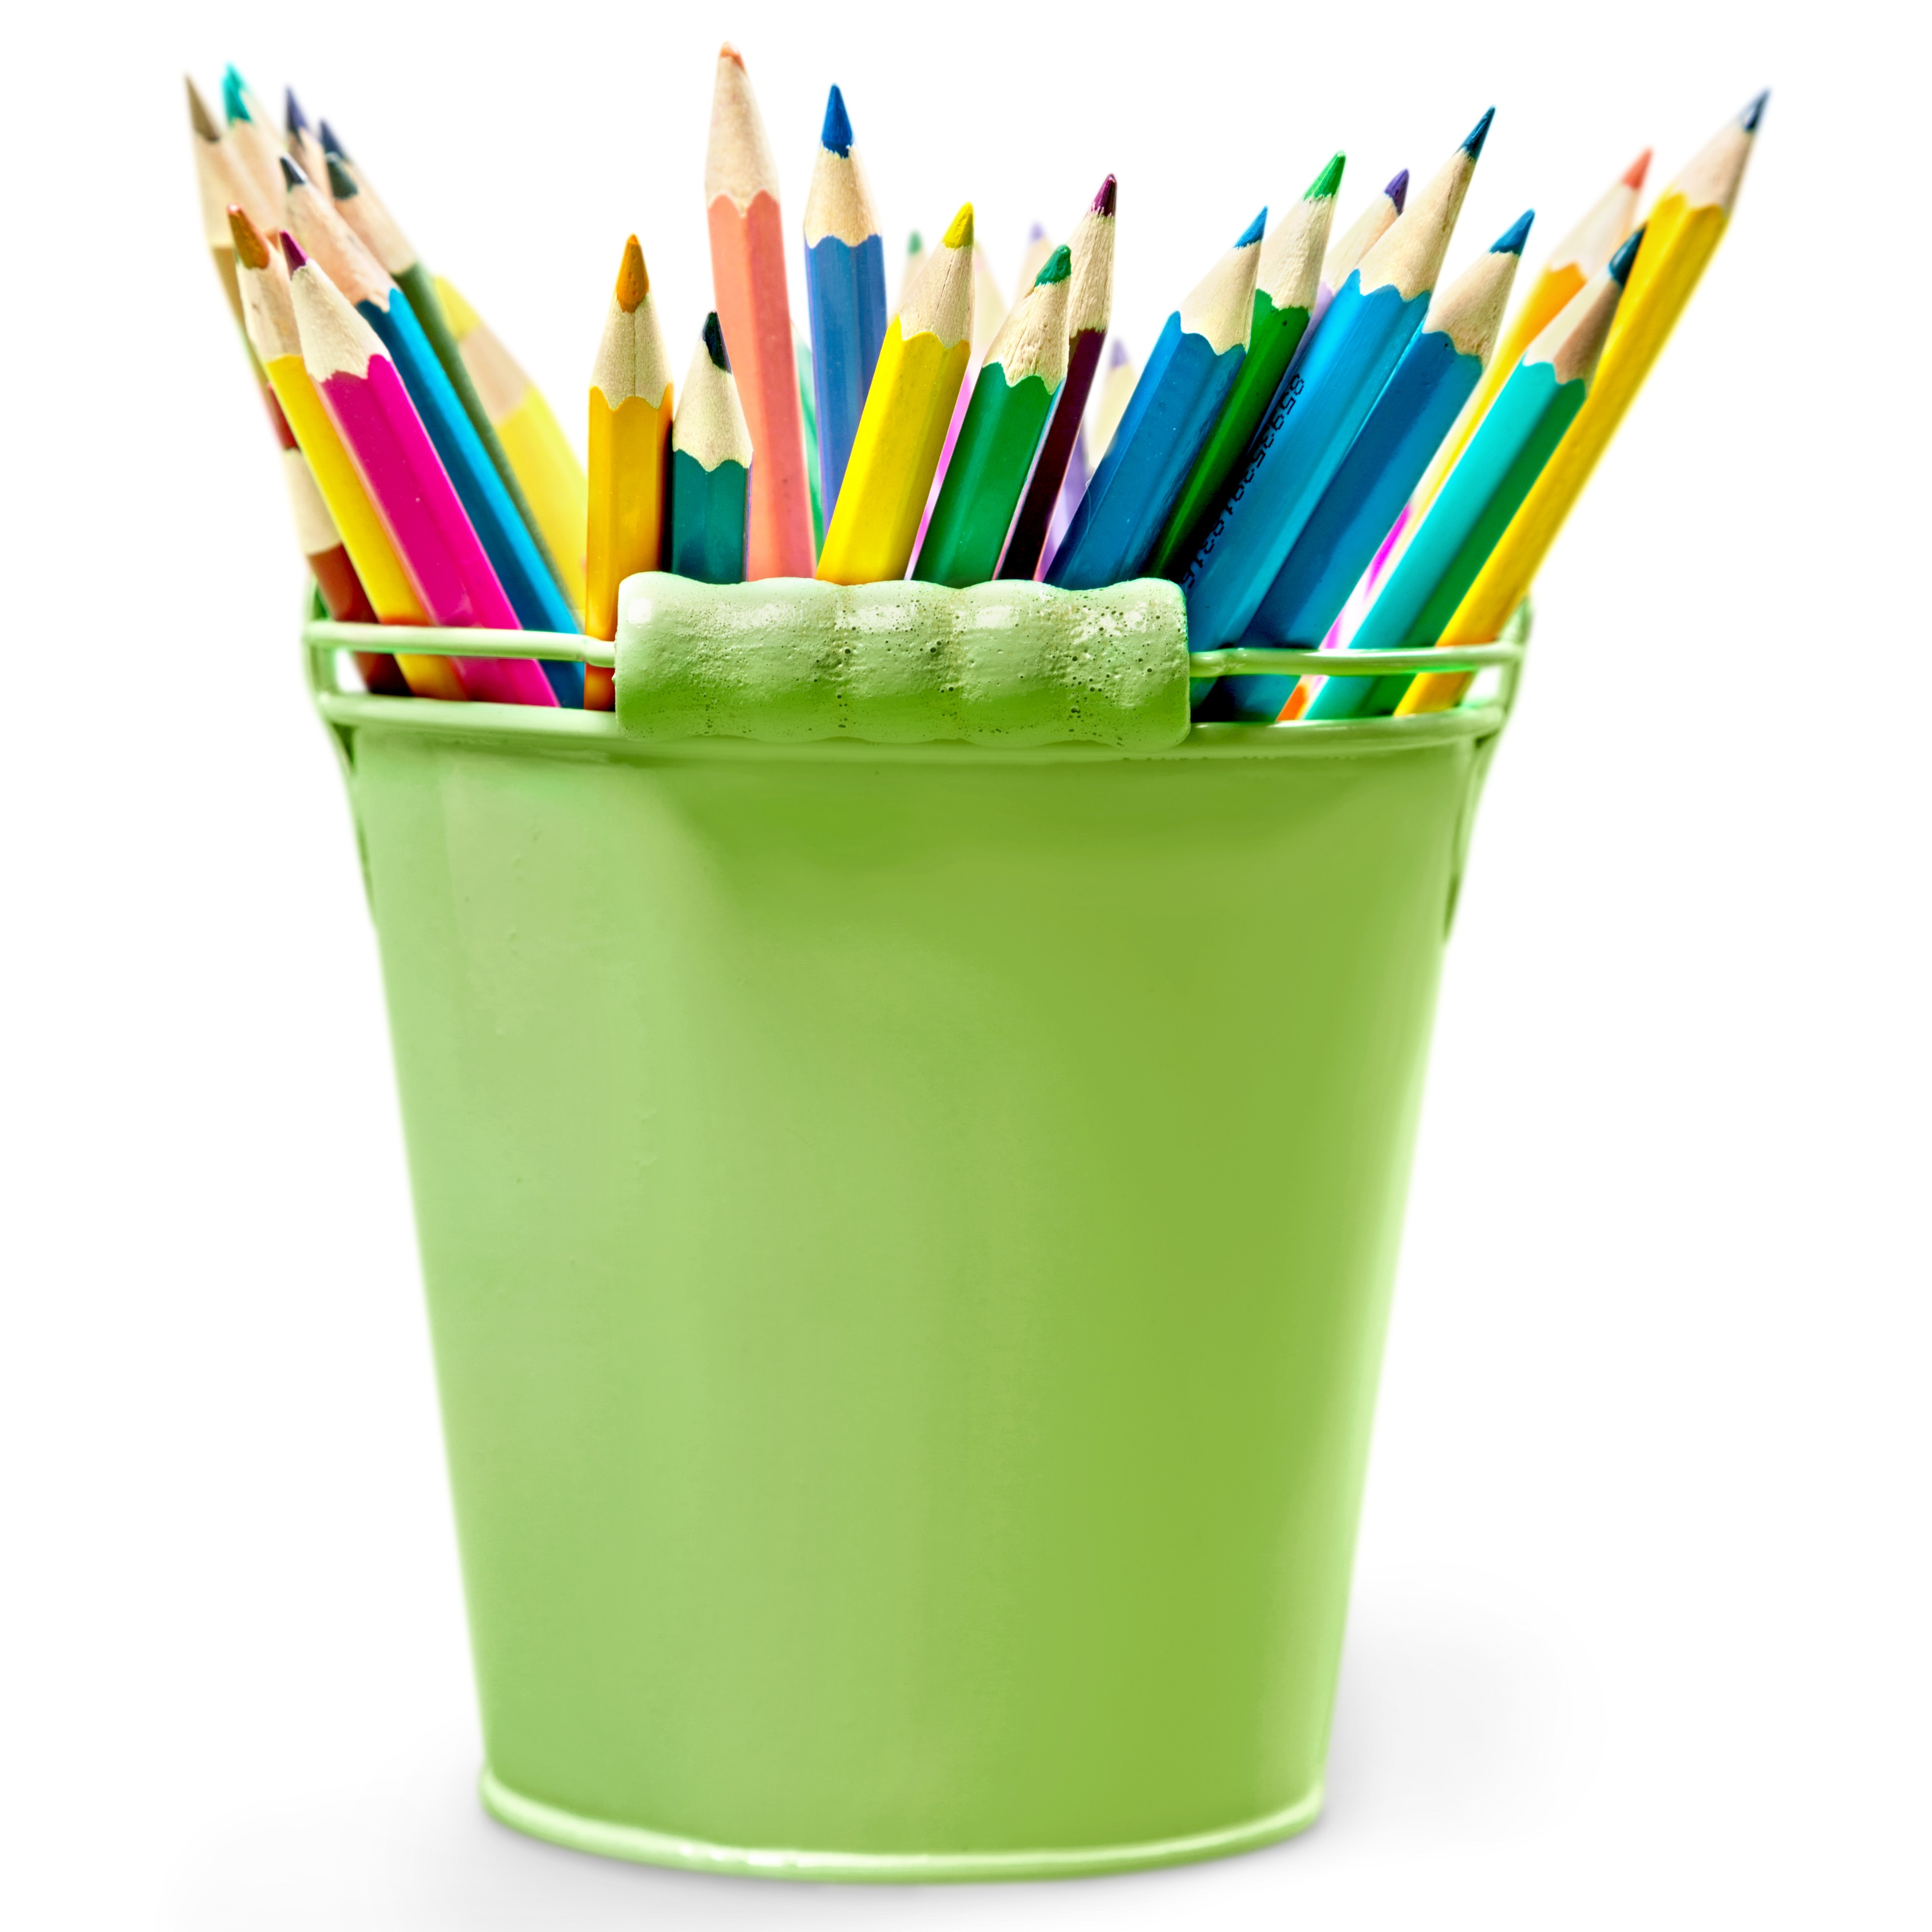 A green bucket of colored pencils